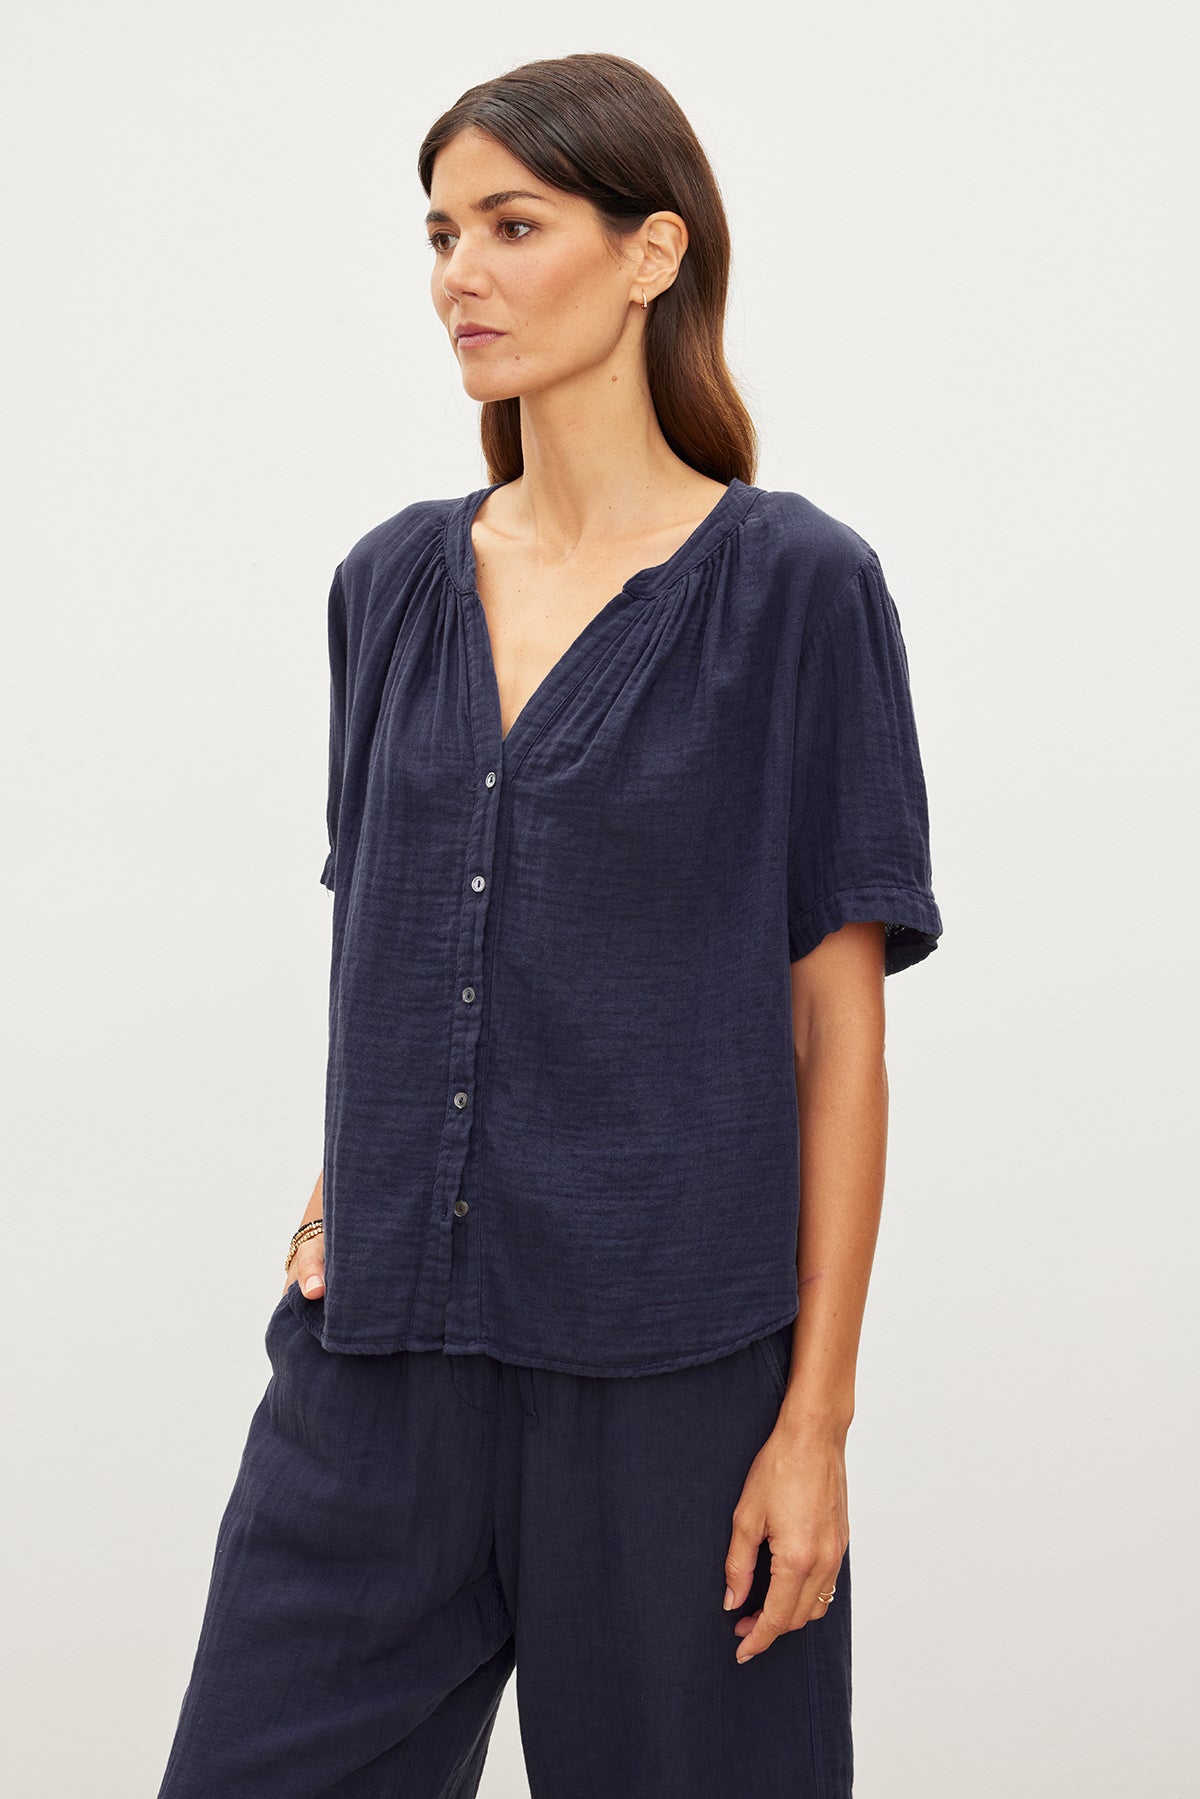 A person stands against a plain background wearing a dark blue, short-sleeved, button-front DEANN COTTON GAUZE TOP by Velvet by Graham & Spencer with a matching pair of pants.-35955697451201